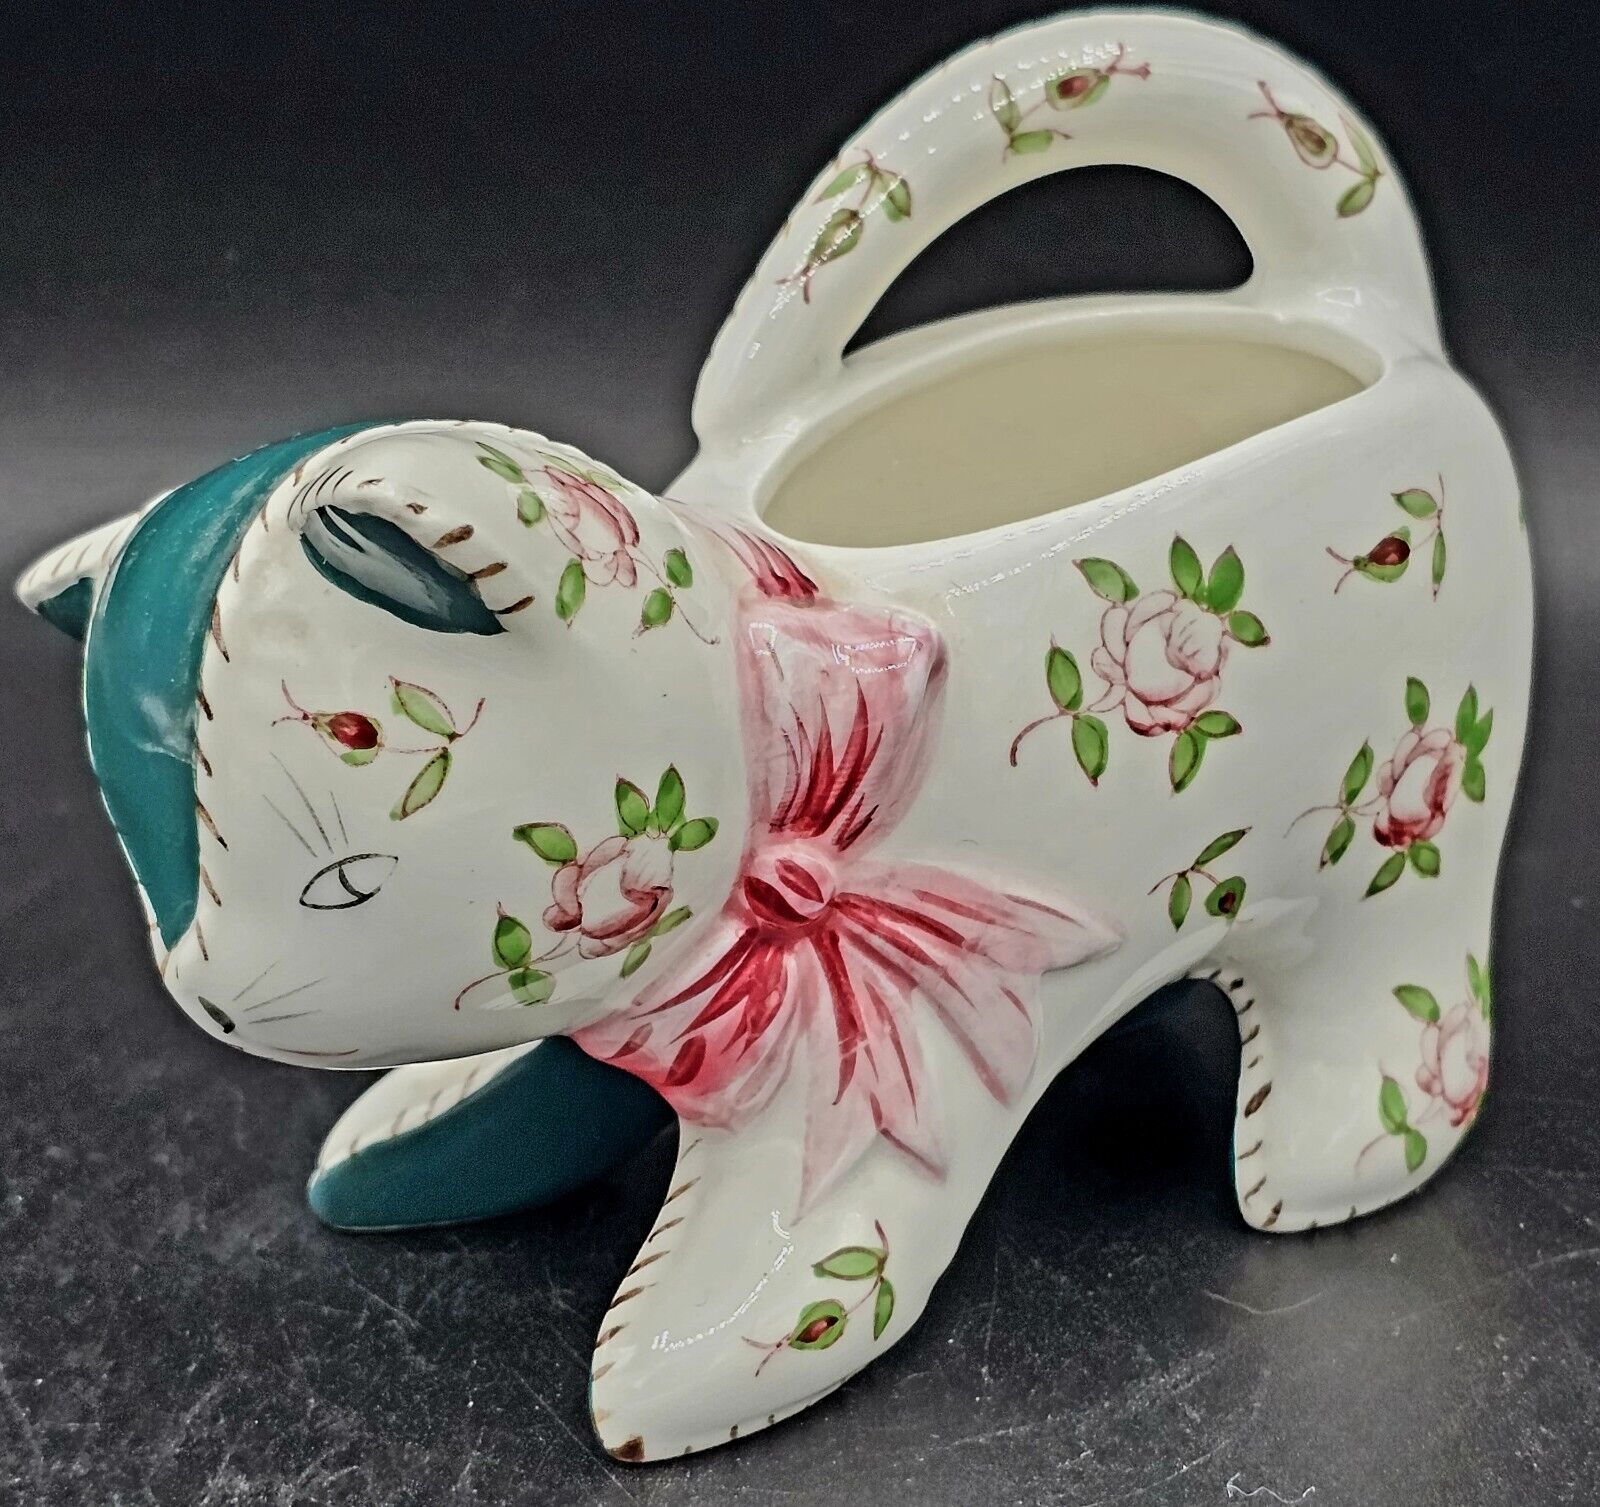 Vnt Lefton Kitty Cat Planter Hand-painted